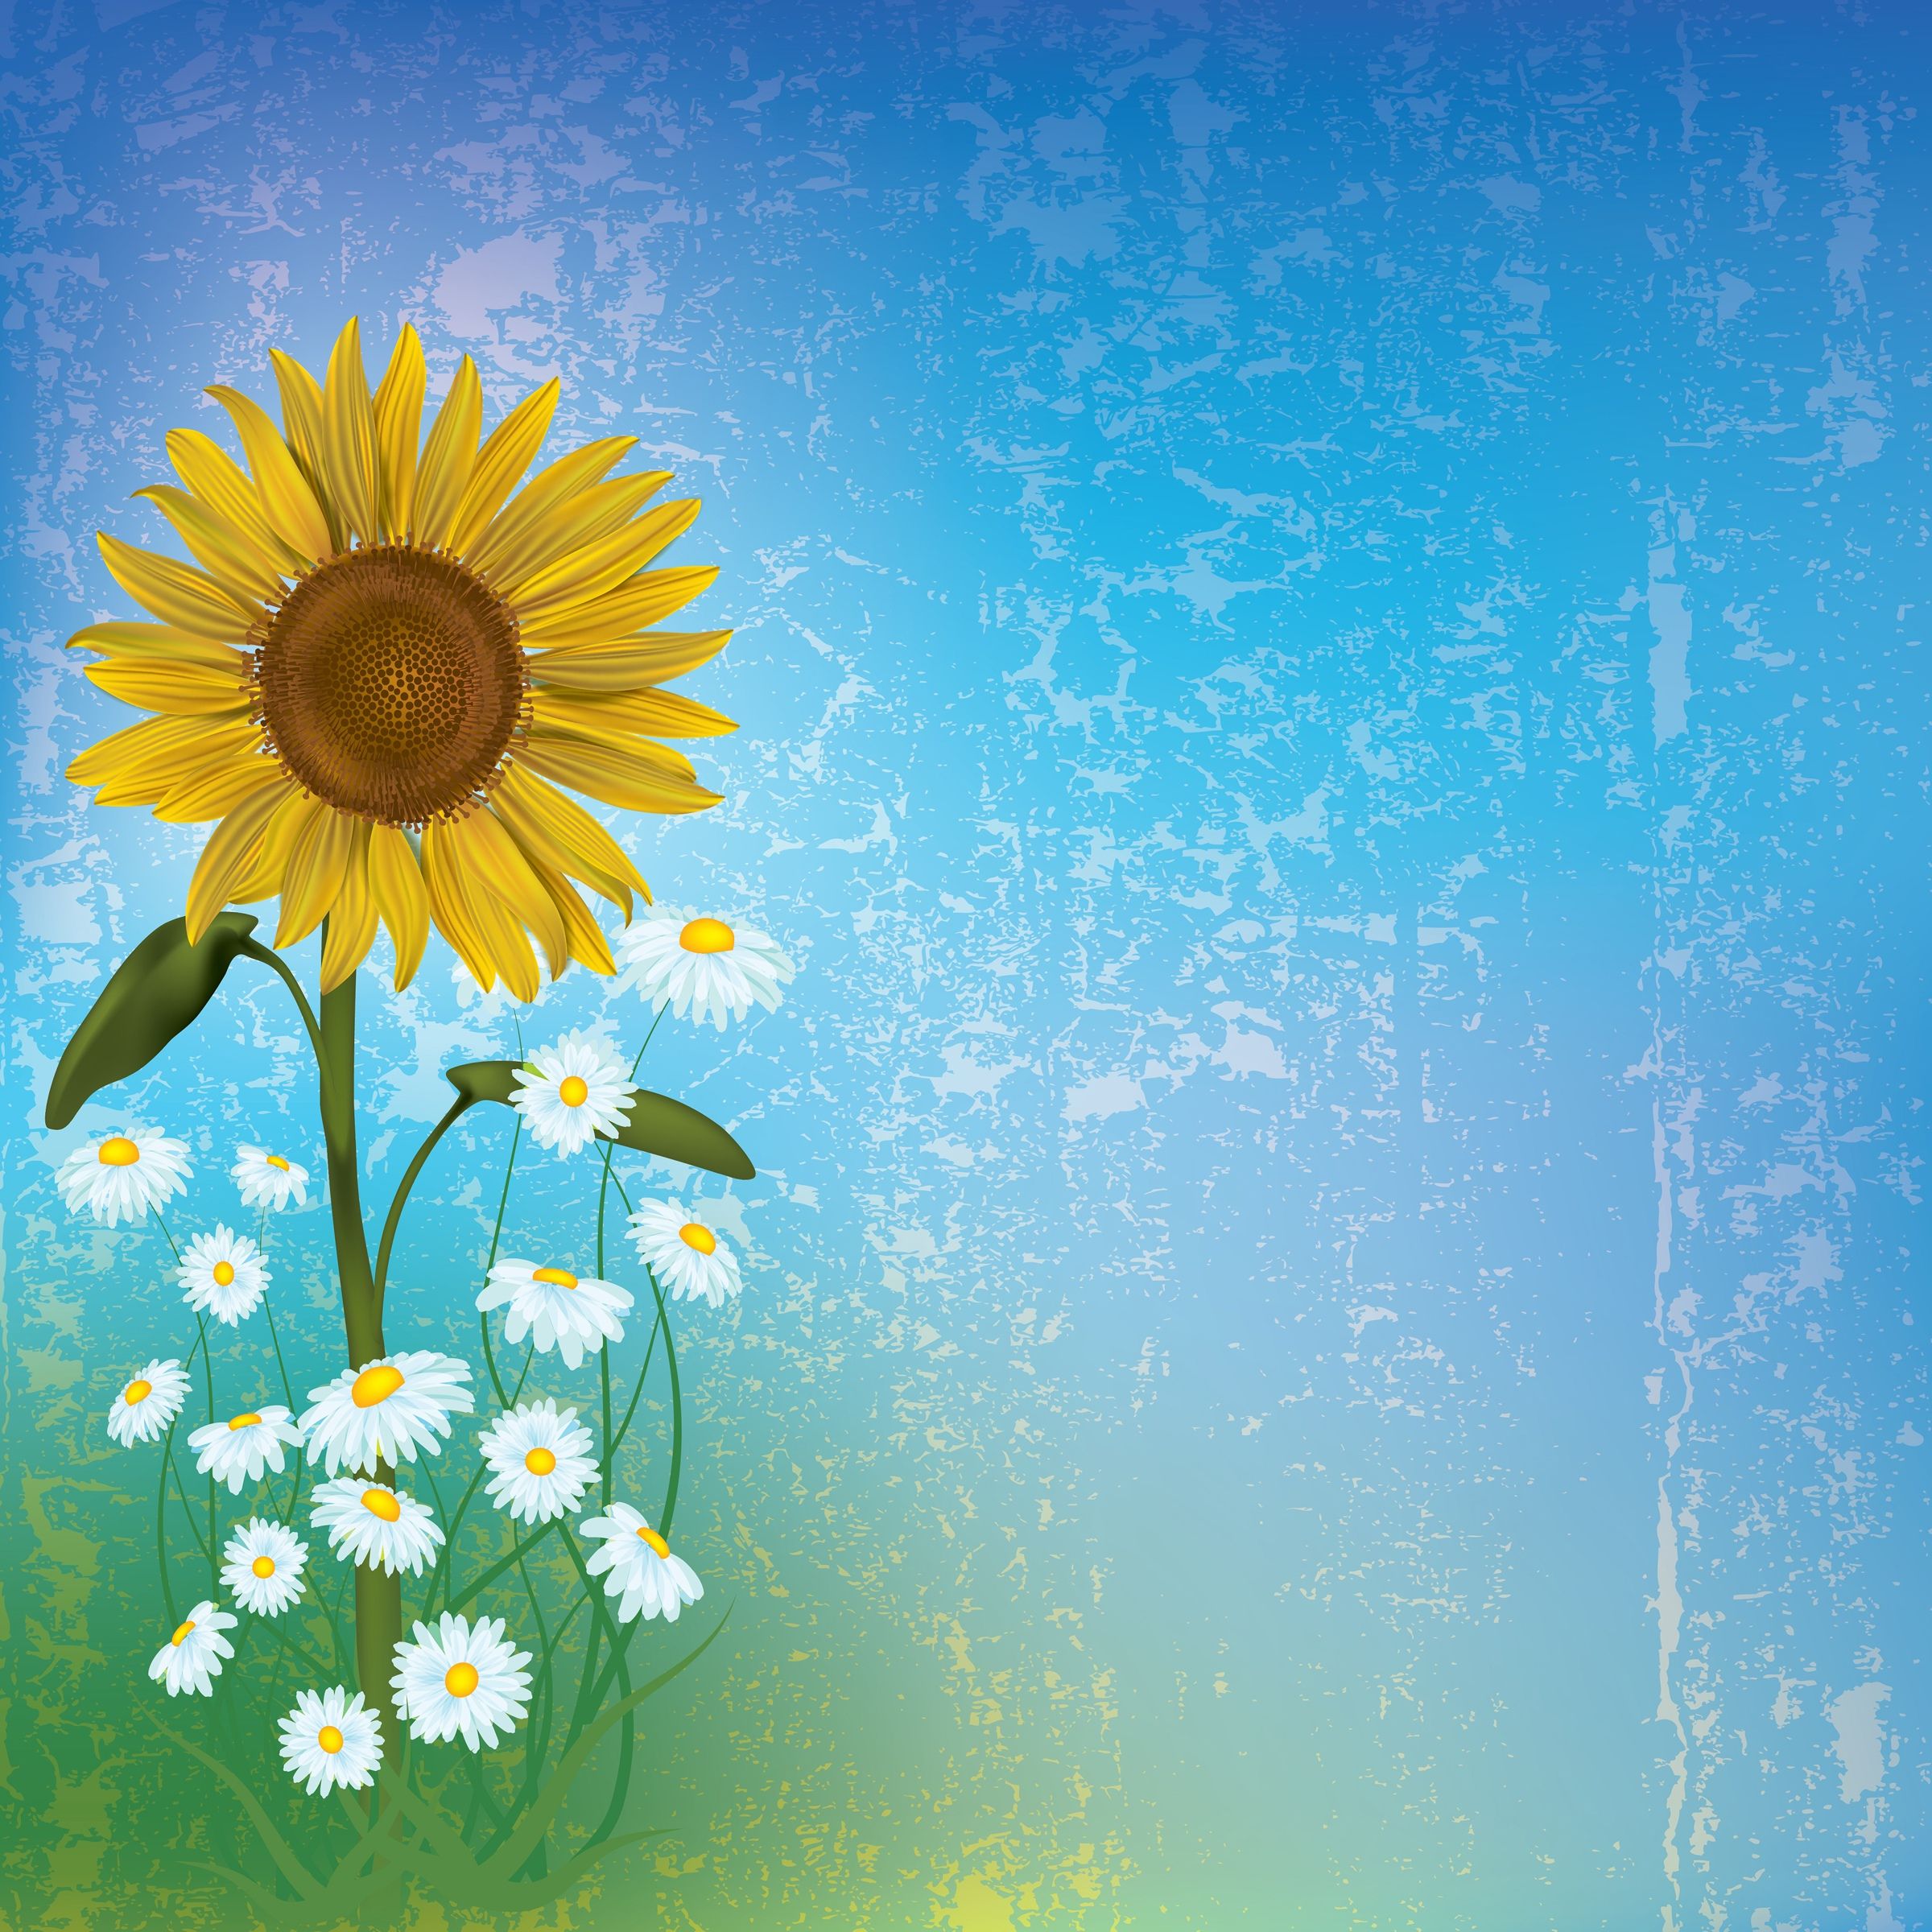 Sunflowers and Daisies Wallpaper